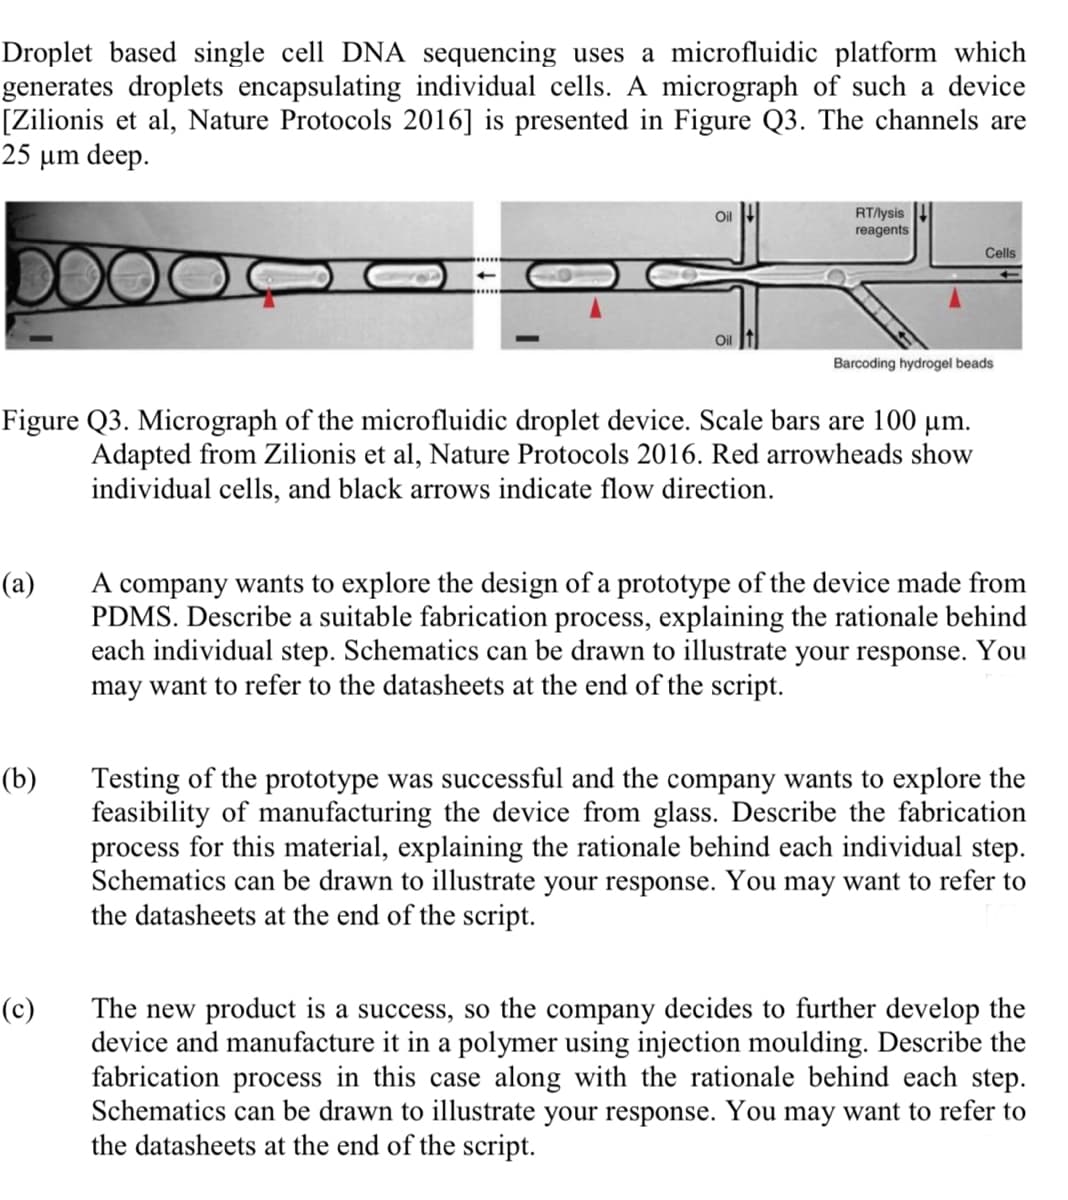 Droplet based single cell DNA sequencing uses a microfluidic platform which
generates droplets encapsulating individual cells. A micrograph of such a device
[Zilionis et al, Nature Protocols 2016] is presented in Figure Q3. The channels are
25 μm deep.
(a)
(b)
Oil
Figure Q3. Micrograph of the microfluidic droplet device. Scale bars are 100 µm.
Adapted from Zilionis et al, Nature Protocols 2016. Red arrowheads show
individual cells, and black arrows indicate flow direction.
(c)
RT/lysis
reagents
Cells
Barcoding hydrogel beads
A company wants to explore the design of a prototype of the device made from
PDMS. Describe a suitable fabrication process, explaining the rationale behind
each individual step. Schematics can be drawn to illustrate your response. You
may want to refer to the datasheets at the end of the script.
Testing of the prototype was successful and the company wants to explore the
feasibility of manufacturing the device from glass. Describe the fabrication
process for this material, explaining the rationale behind each individual step.
Schematics can be drawn to illustrate your response. You may want to refer to
the datasheets at the end of the script.
The new product is a success, so the company decides to further develop the
device and manufacture it in a polymer using injection moulding. Describe the
fabrication process in this case along with the rationale behind each step.
Schematics can be drawn to illustrate your response. You may want to refer to
the datasheets at the end of the script.